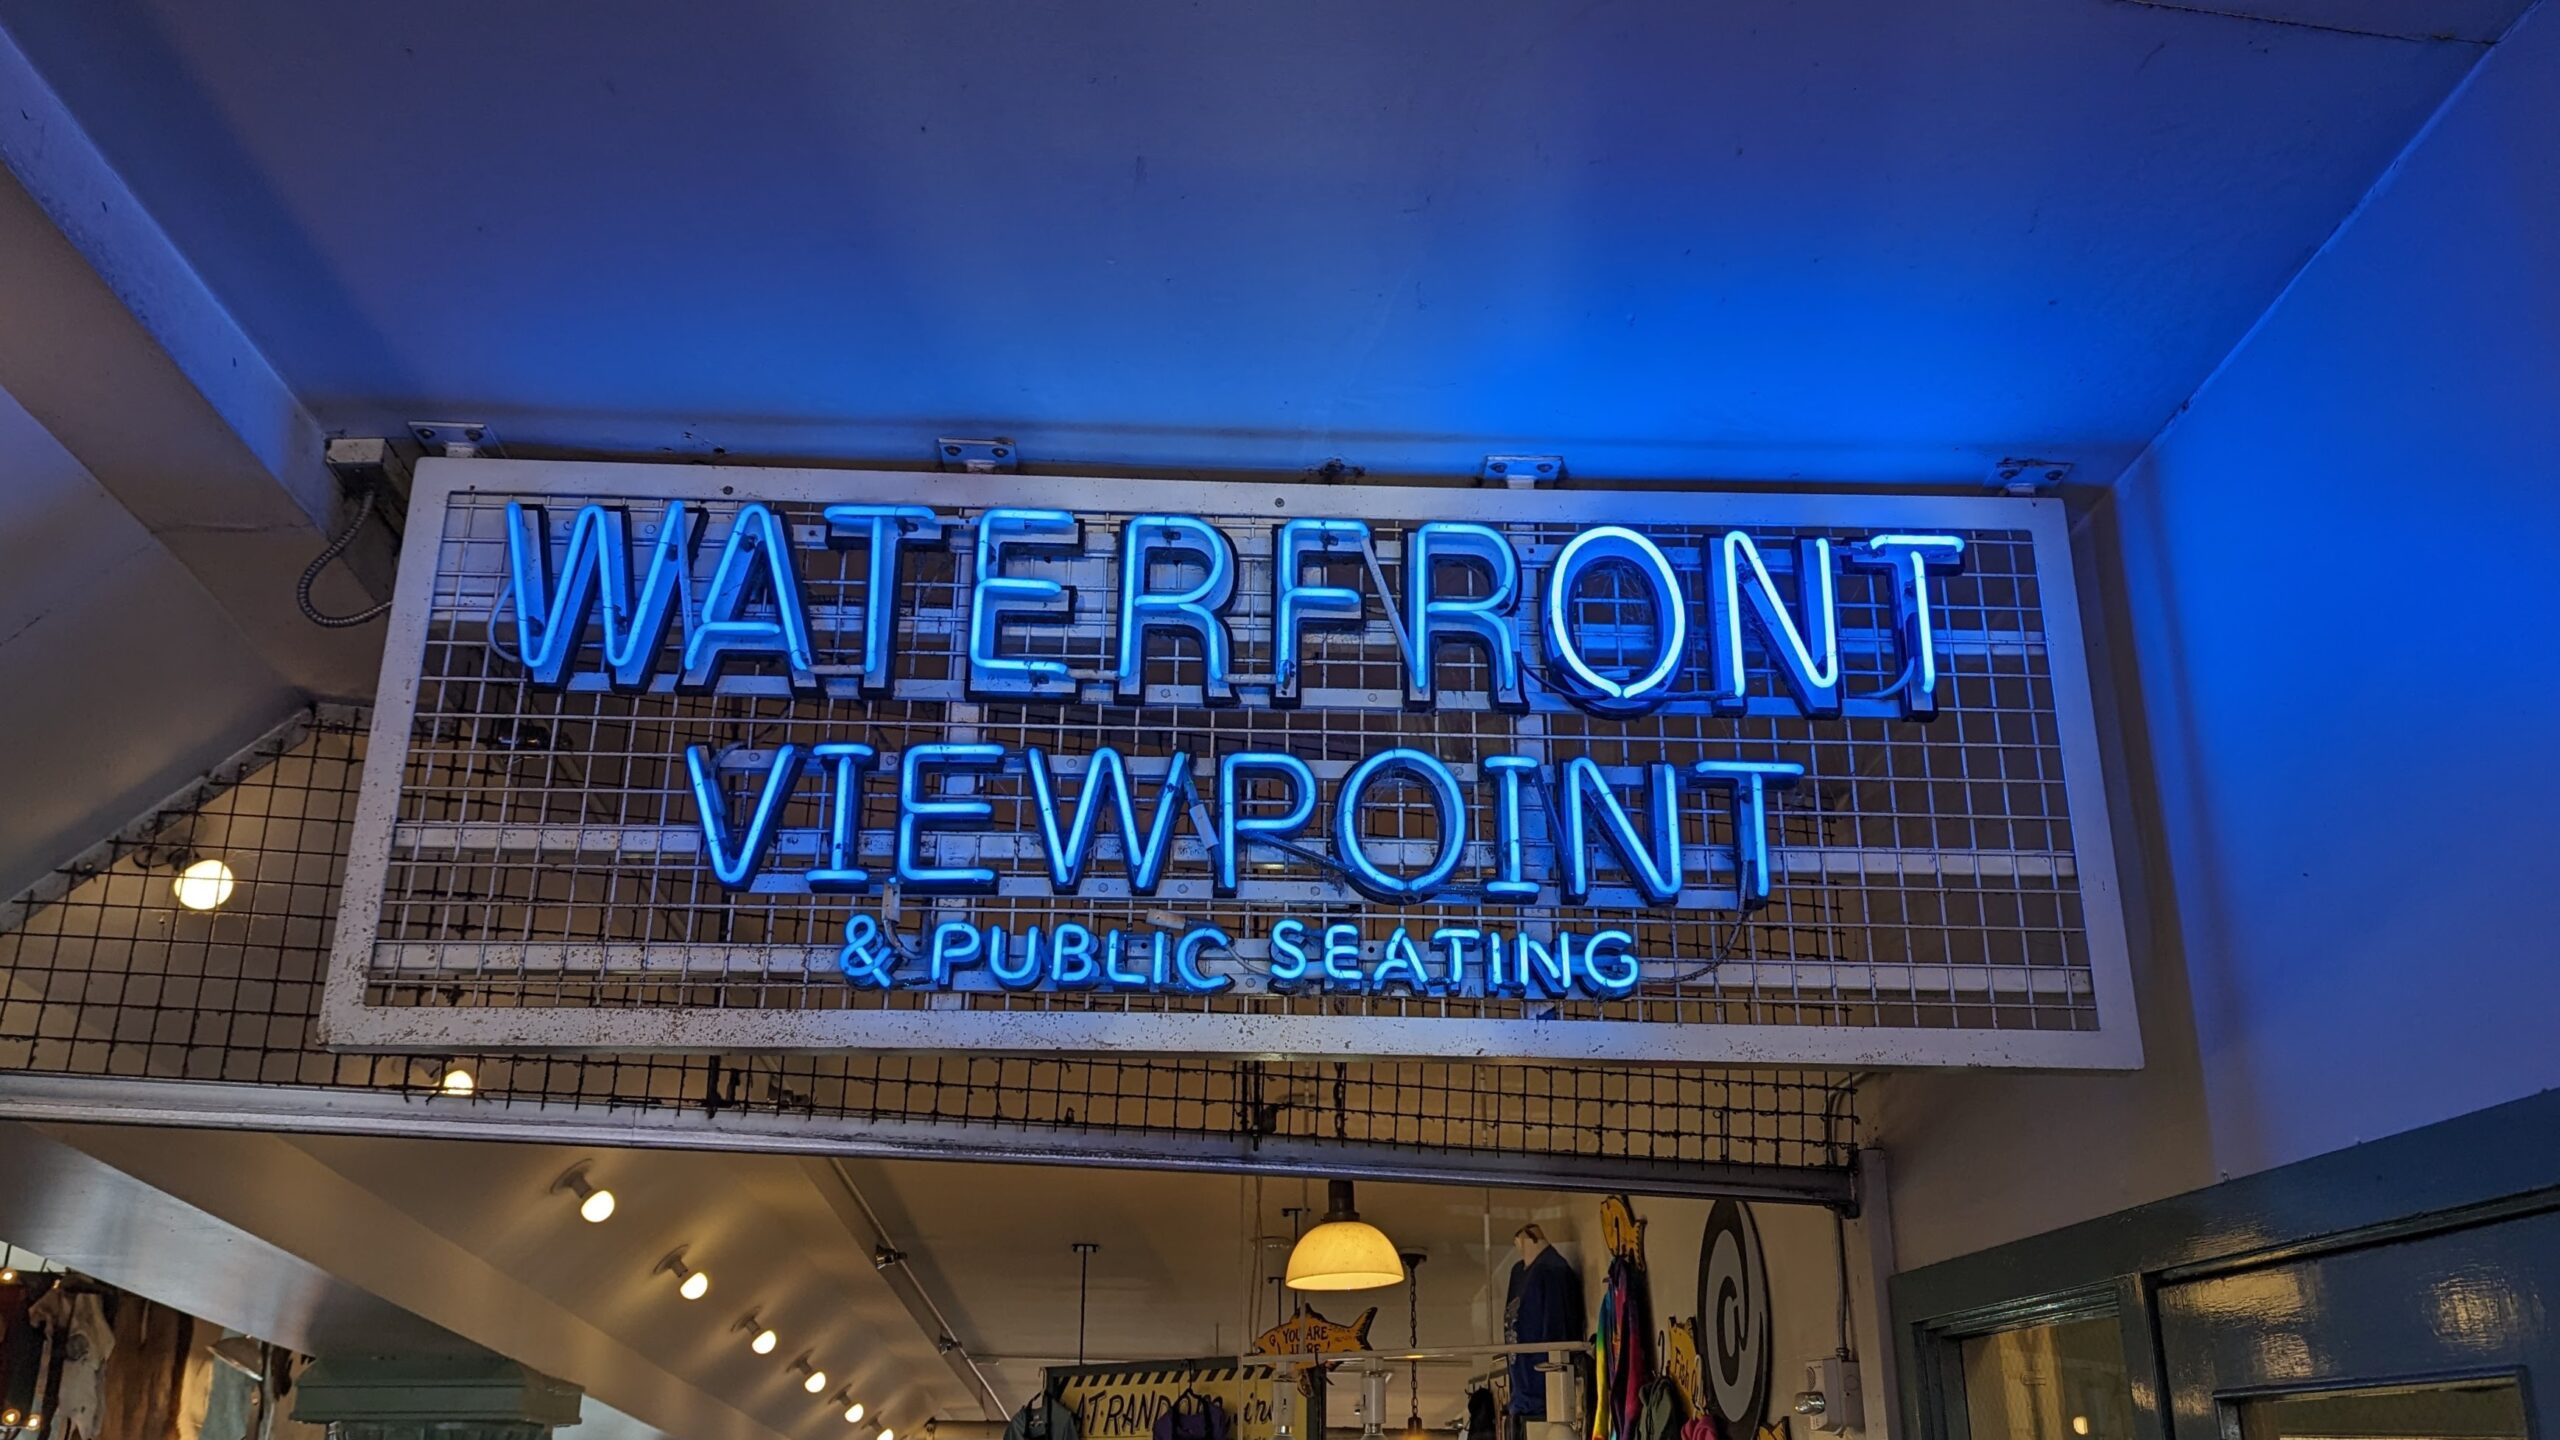 neon sign directing pike place market visitors to public seating and waterfront views at the Market